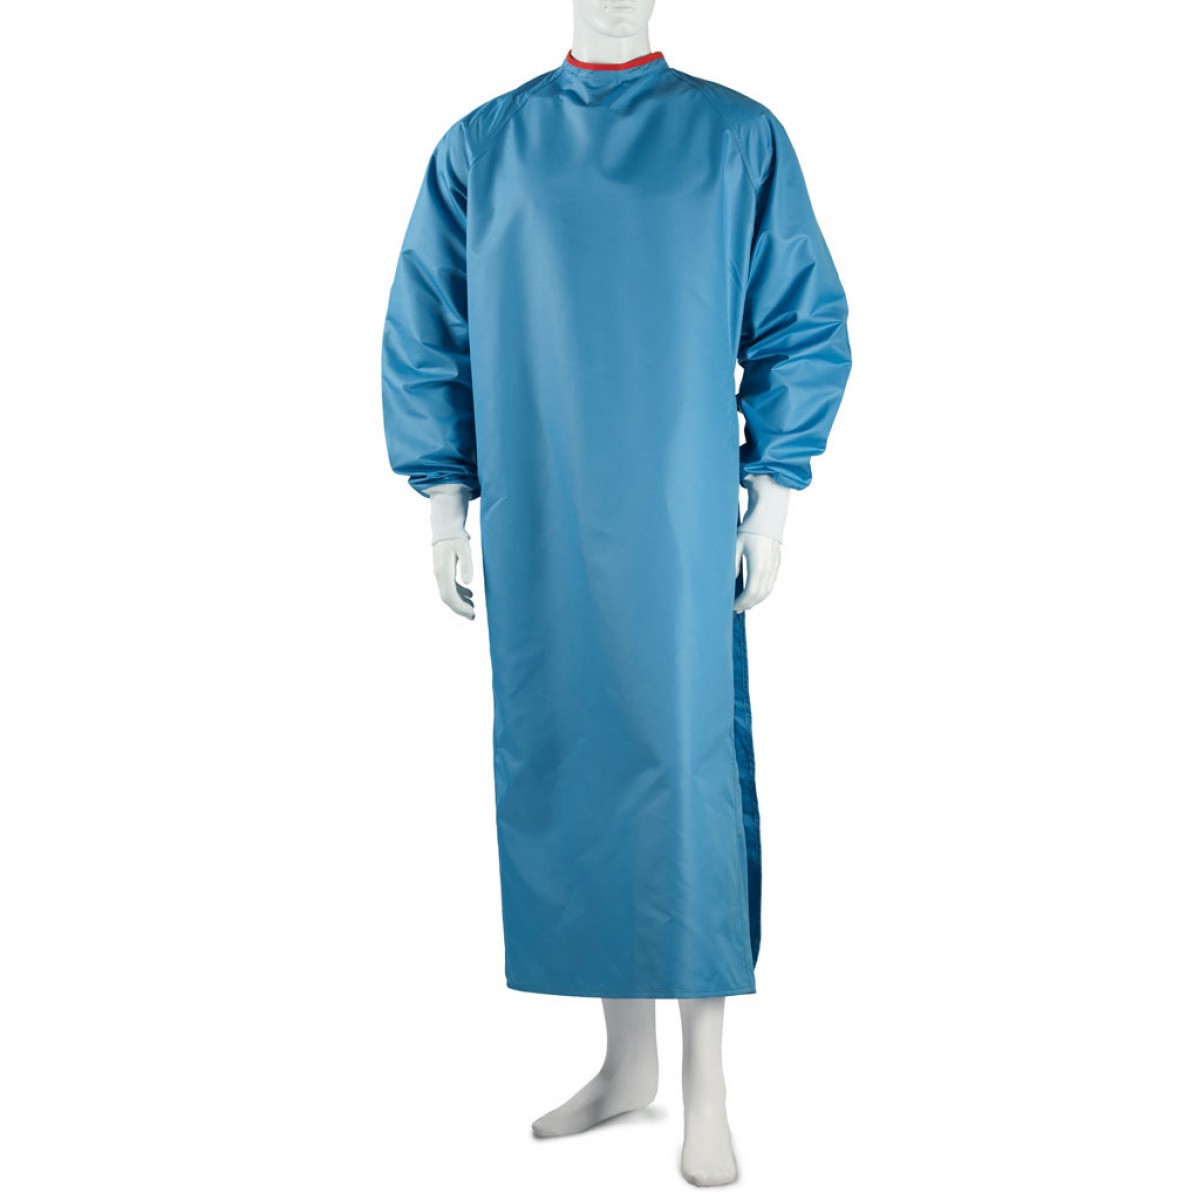 reusable-surgical-gown-standard-performance